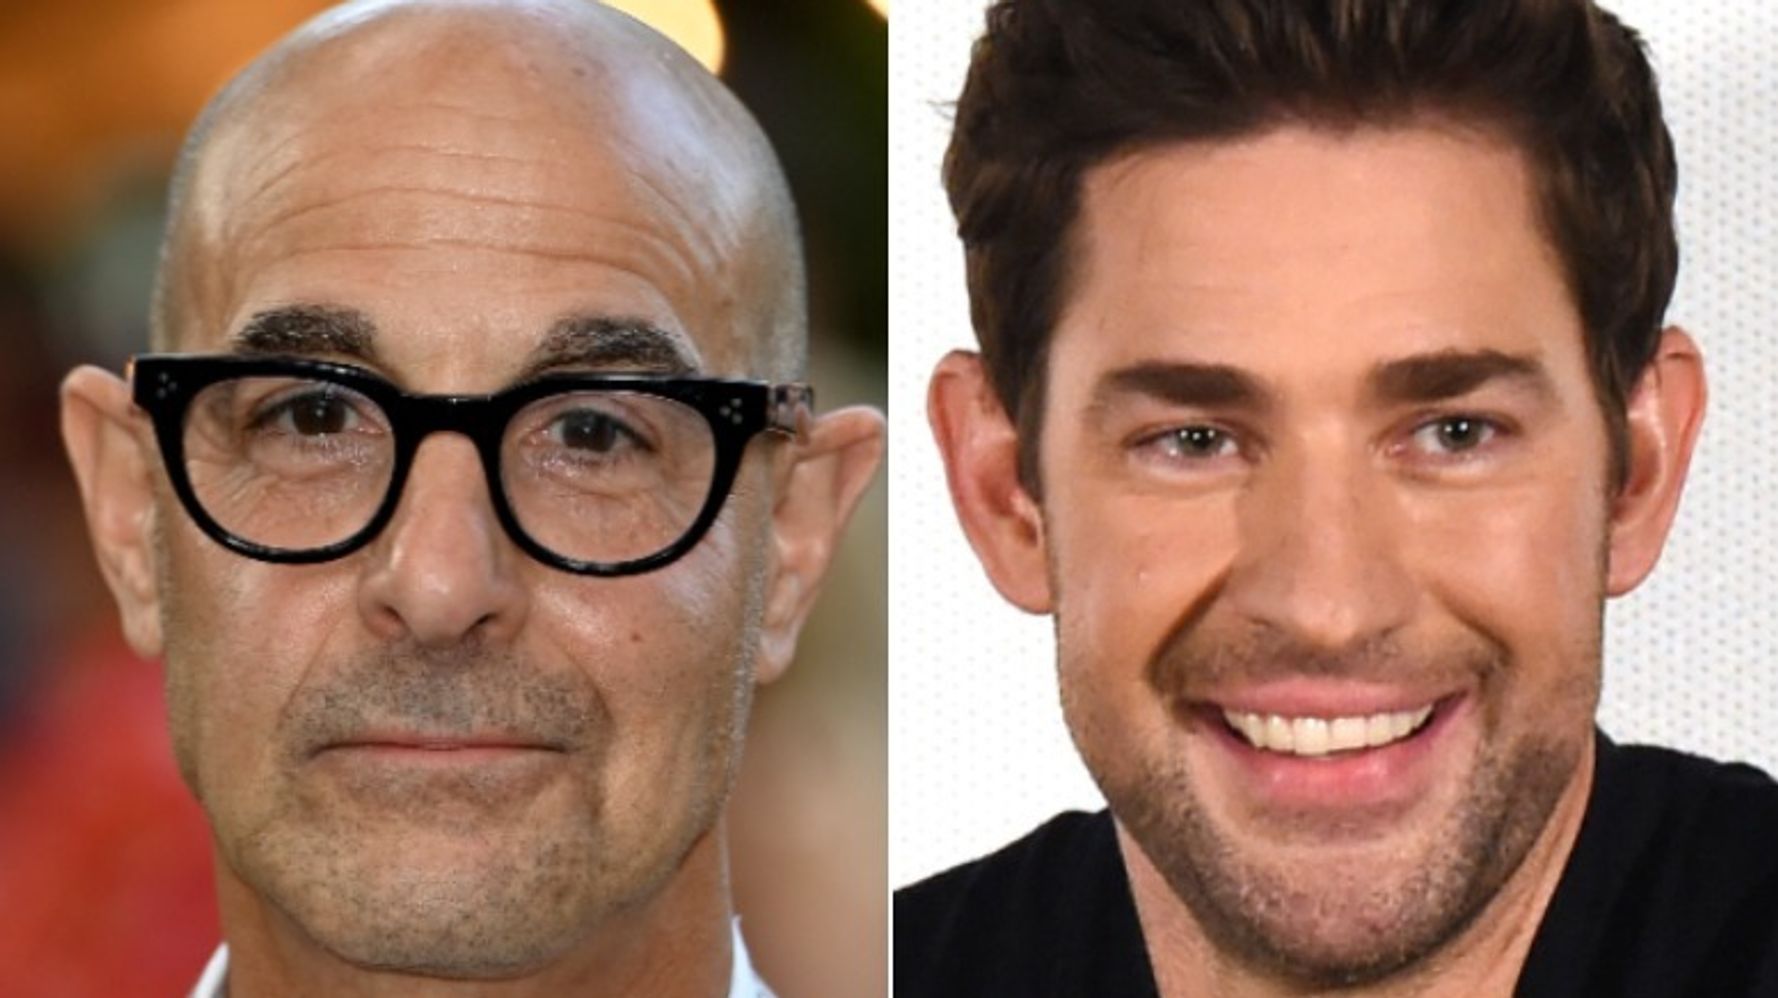 Stanley Tucci Reminds Everyone He's Related To John Krasinski In Sweet Instagram Post | HuffPost Entertainment